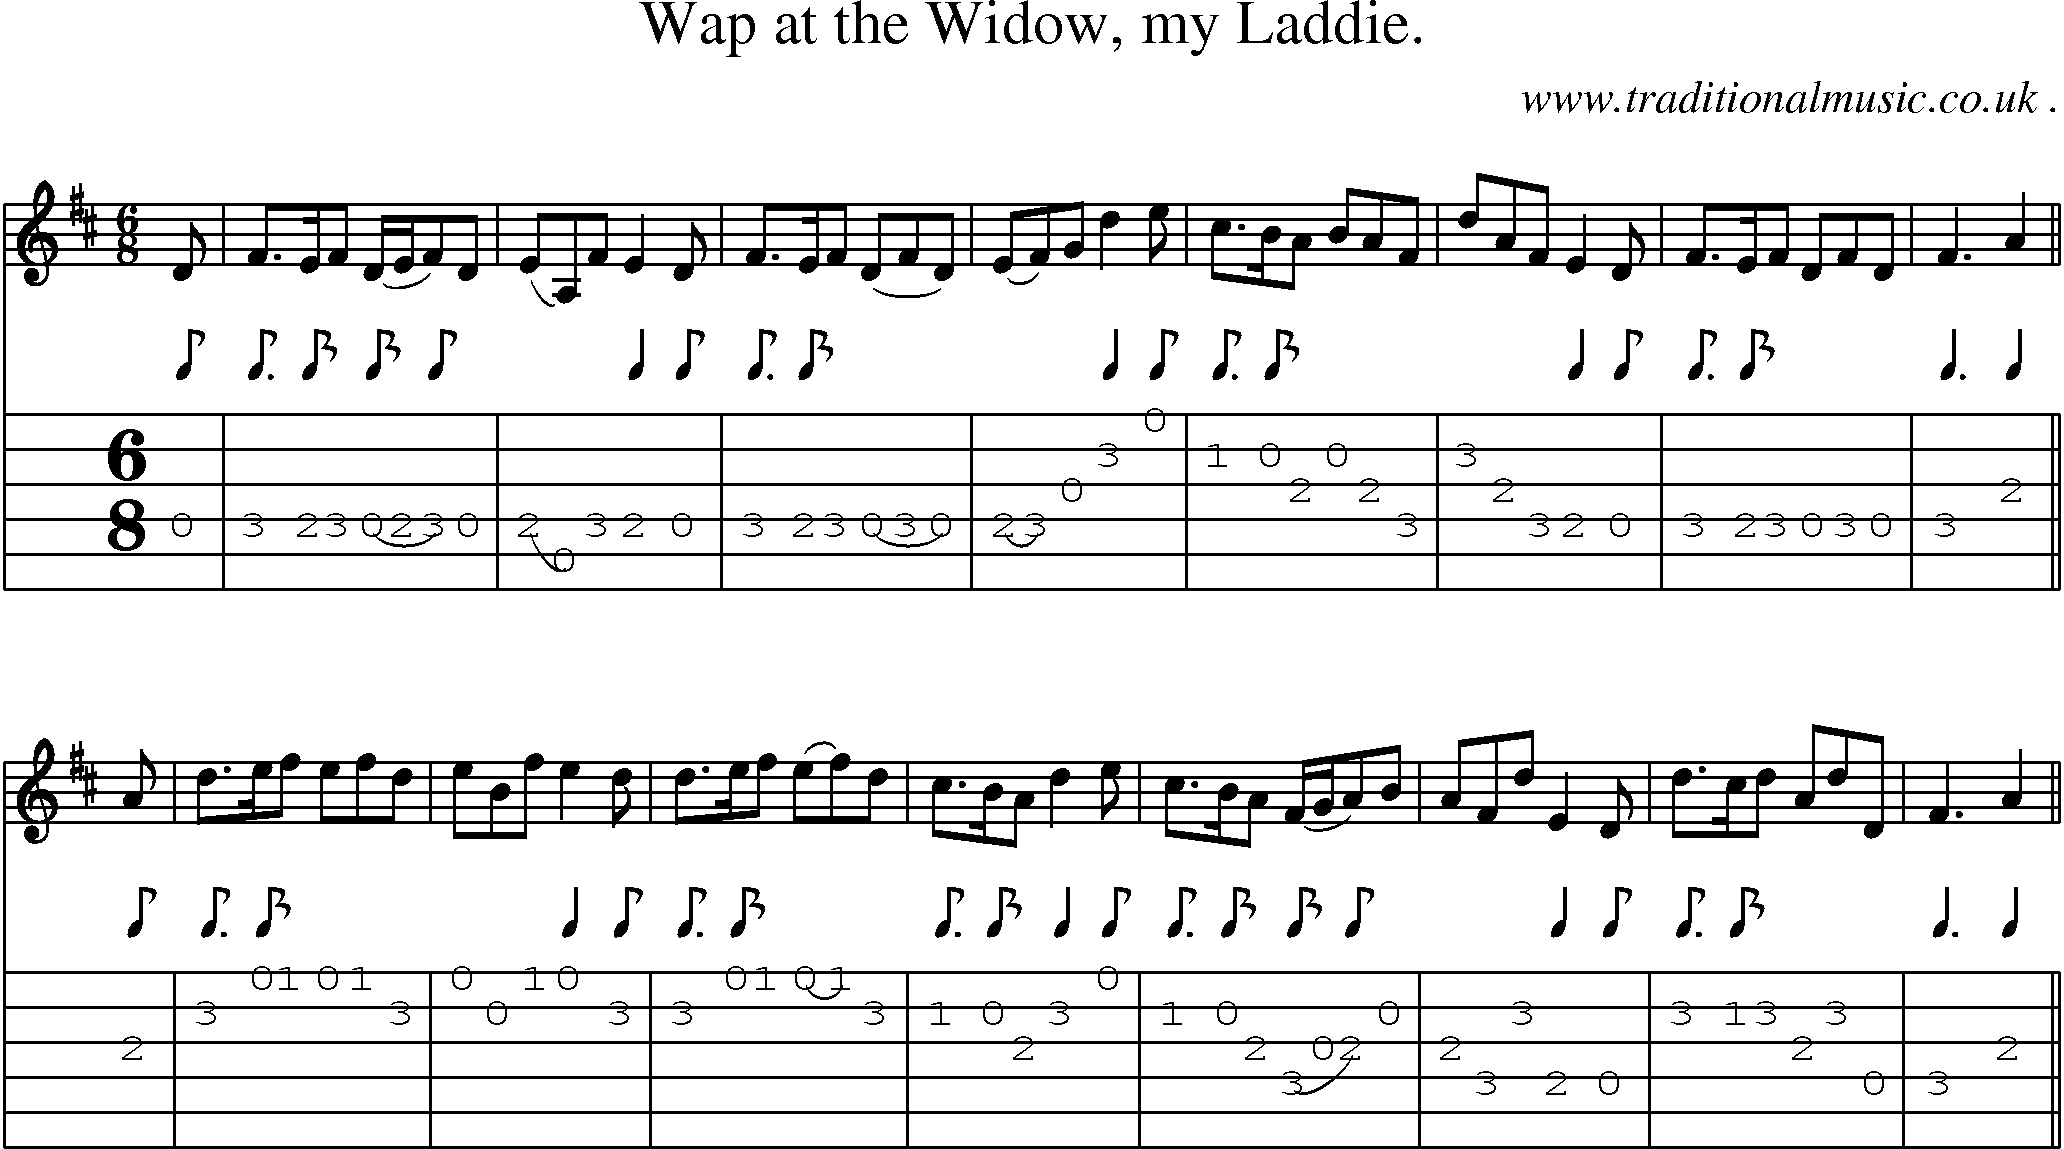 Sheet-Music and Guitar Tabs for Wap At The Widow My Laddie